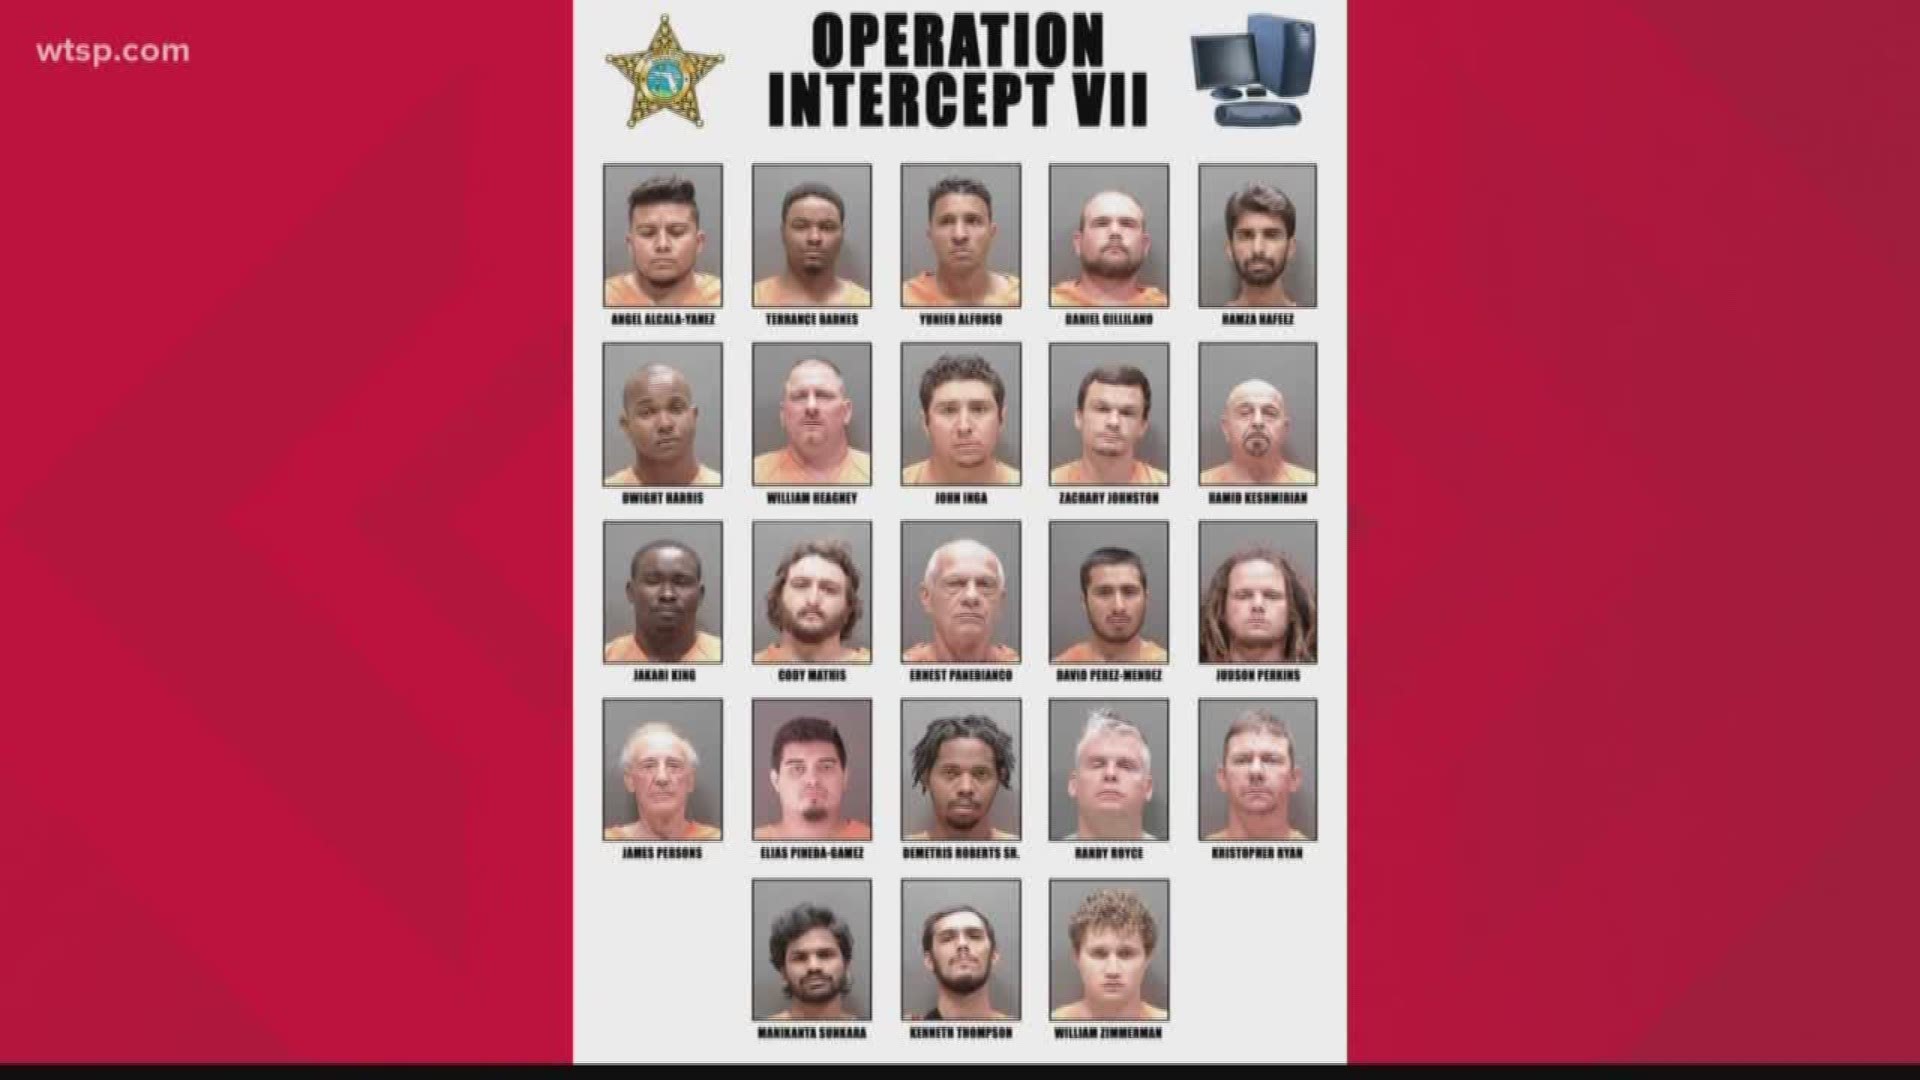 The Sarasota County Sheriff's Office said the arrests were part of Operation Intercept VII.